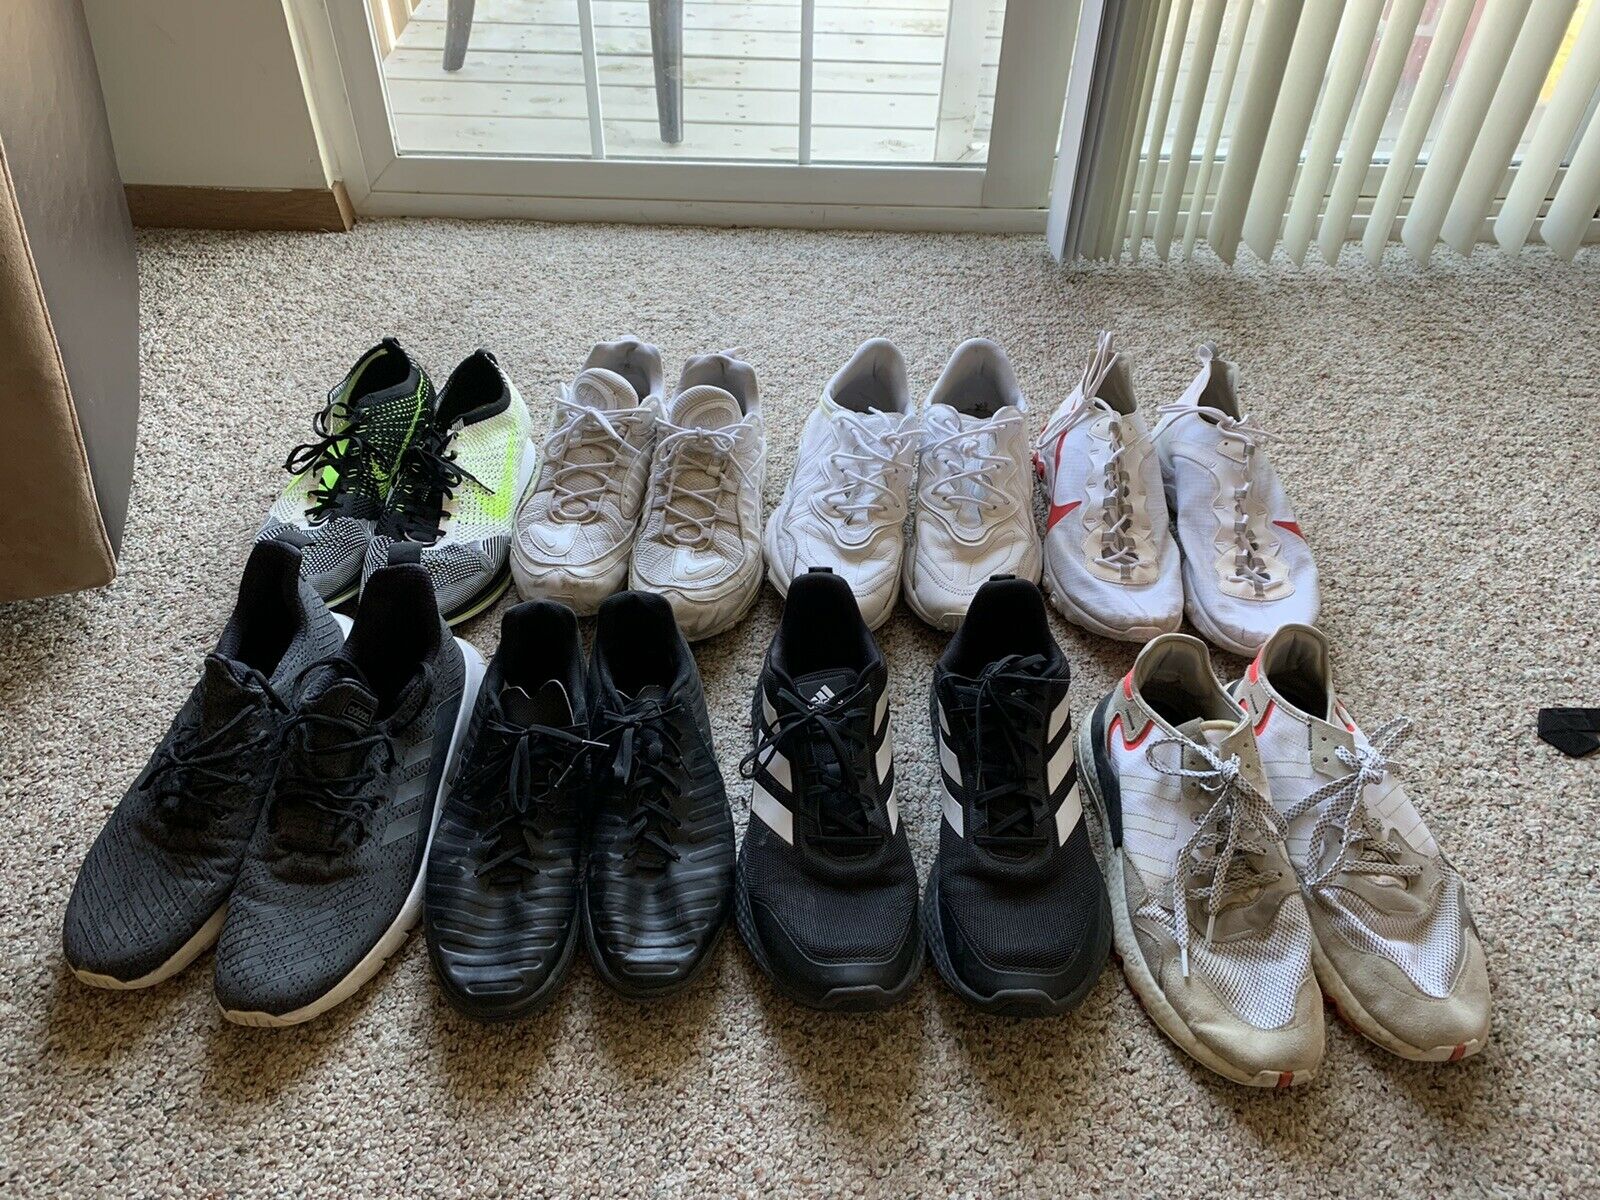 VARIETY OF SHOES. Nike/Adidas. Air Max, Flyknit Racer, Nike React, Tiempo, Etc